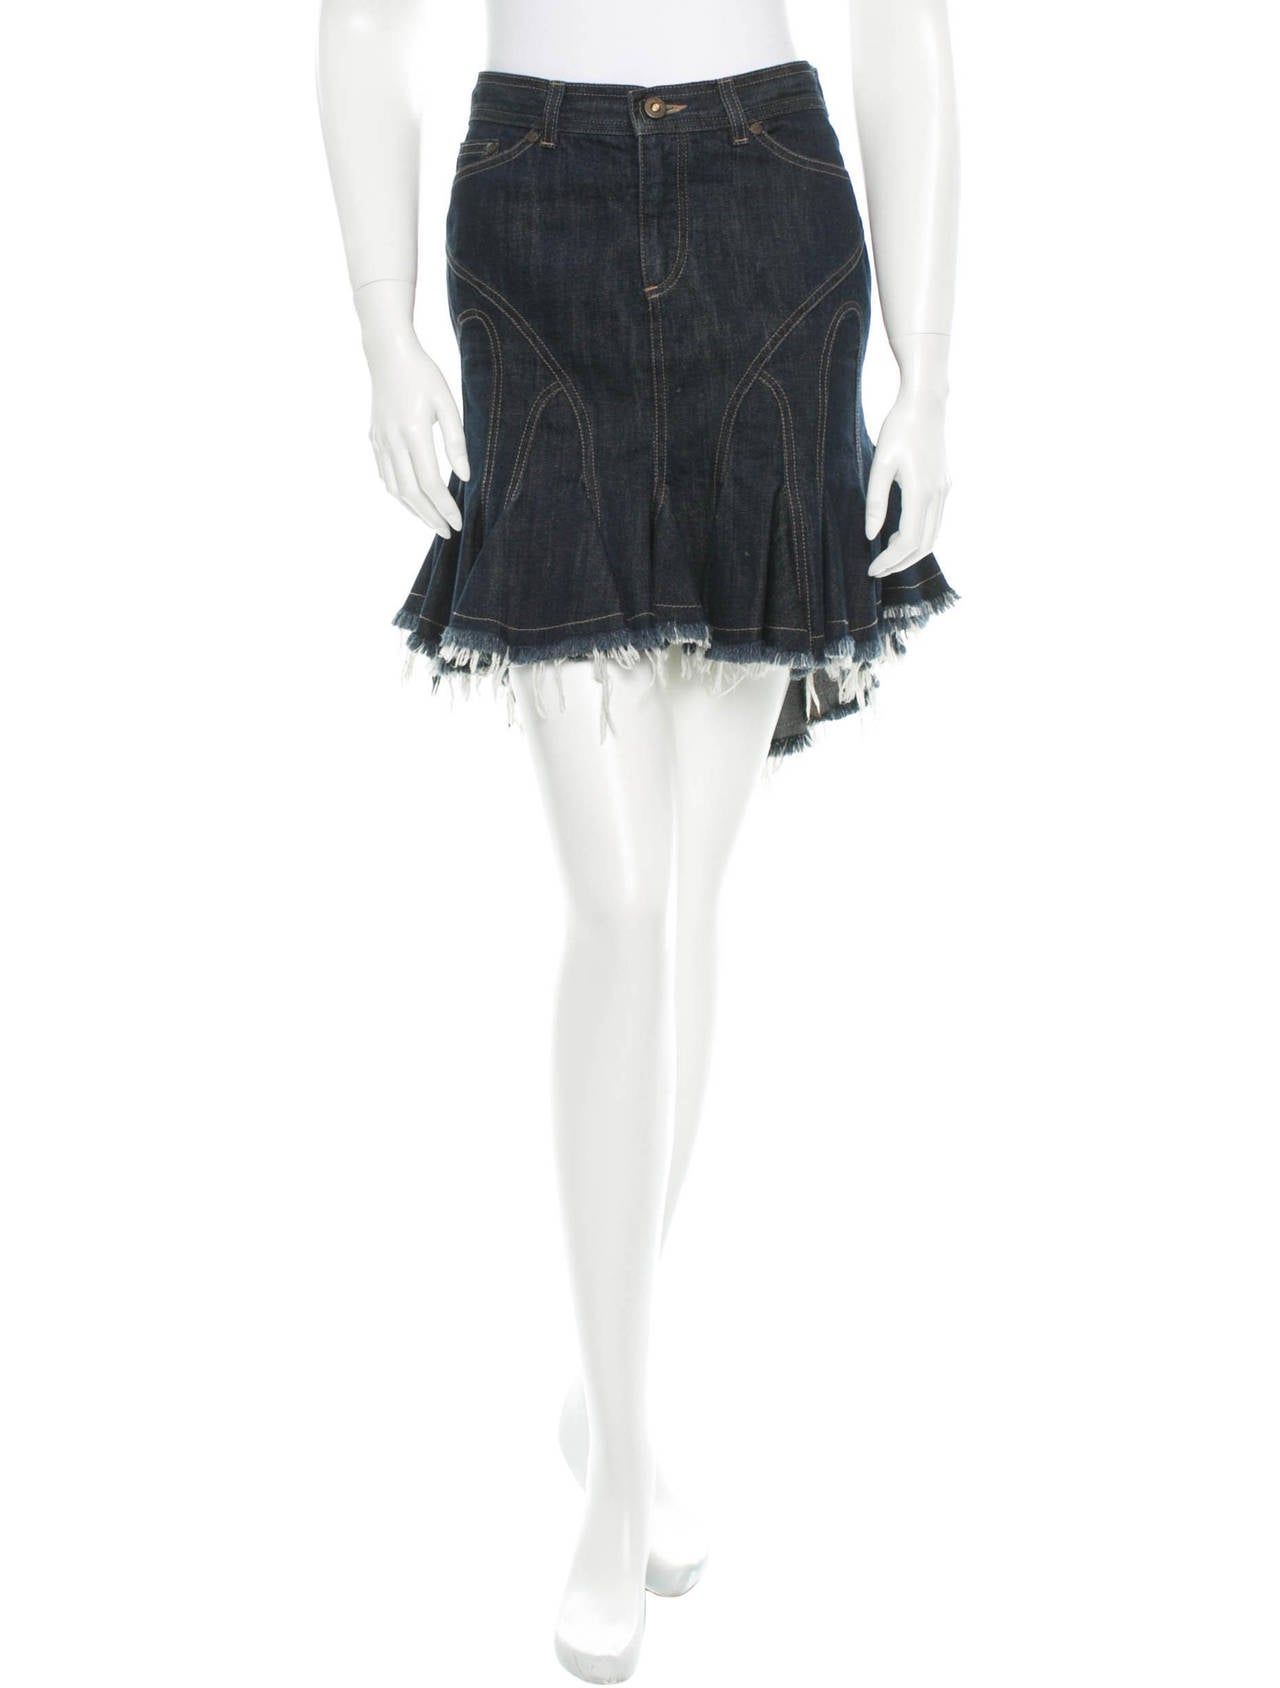 Alexander McQueen flared blue denim mini-skirt with contrast stitching, pockets, and raw edges.
Measurements: Waist 30